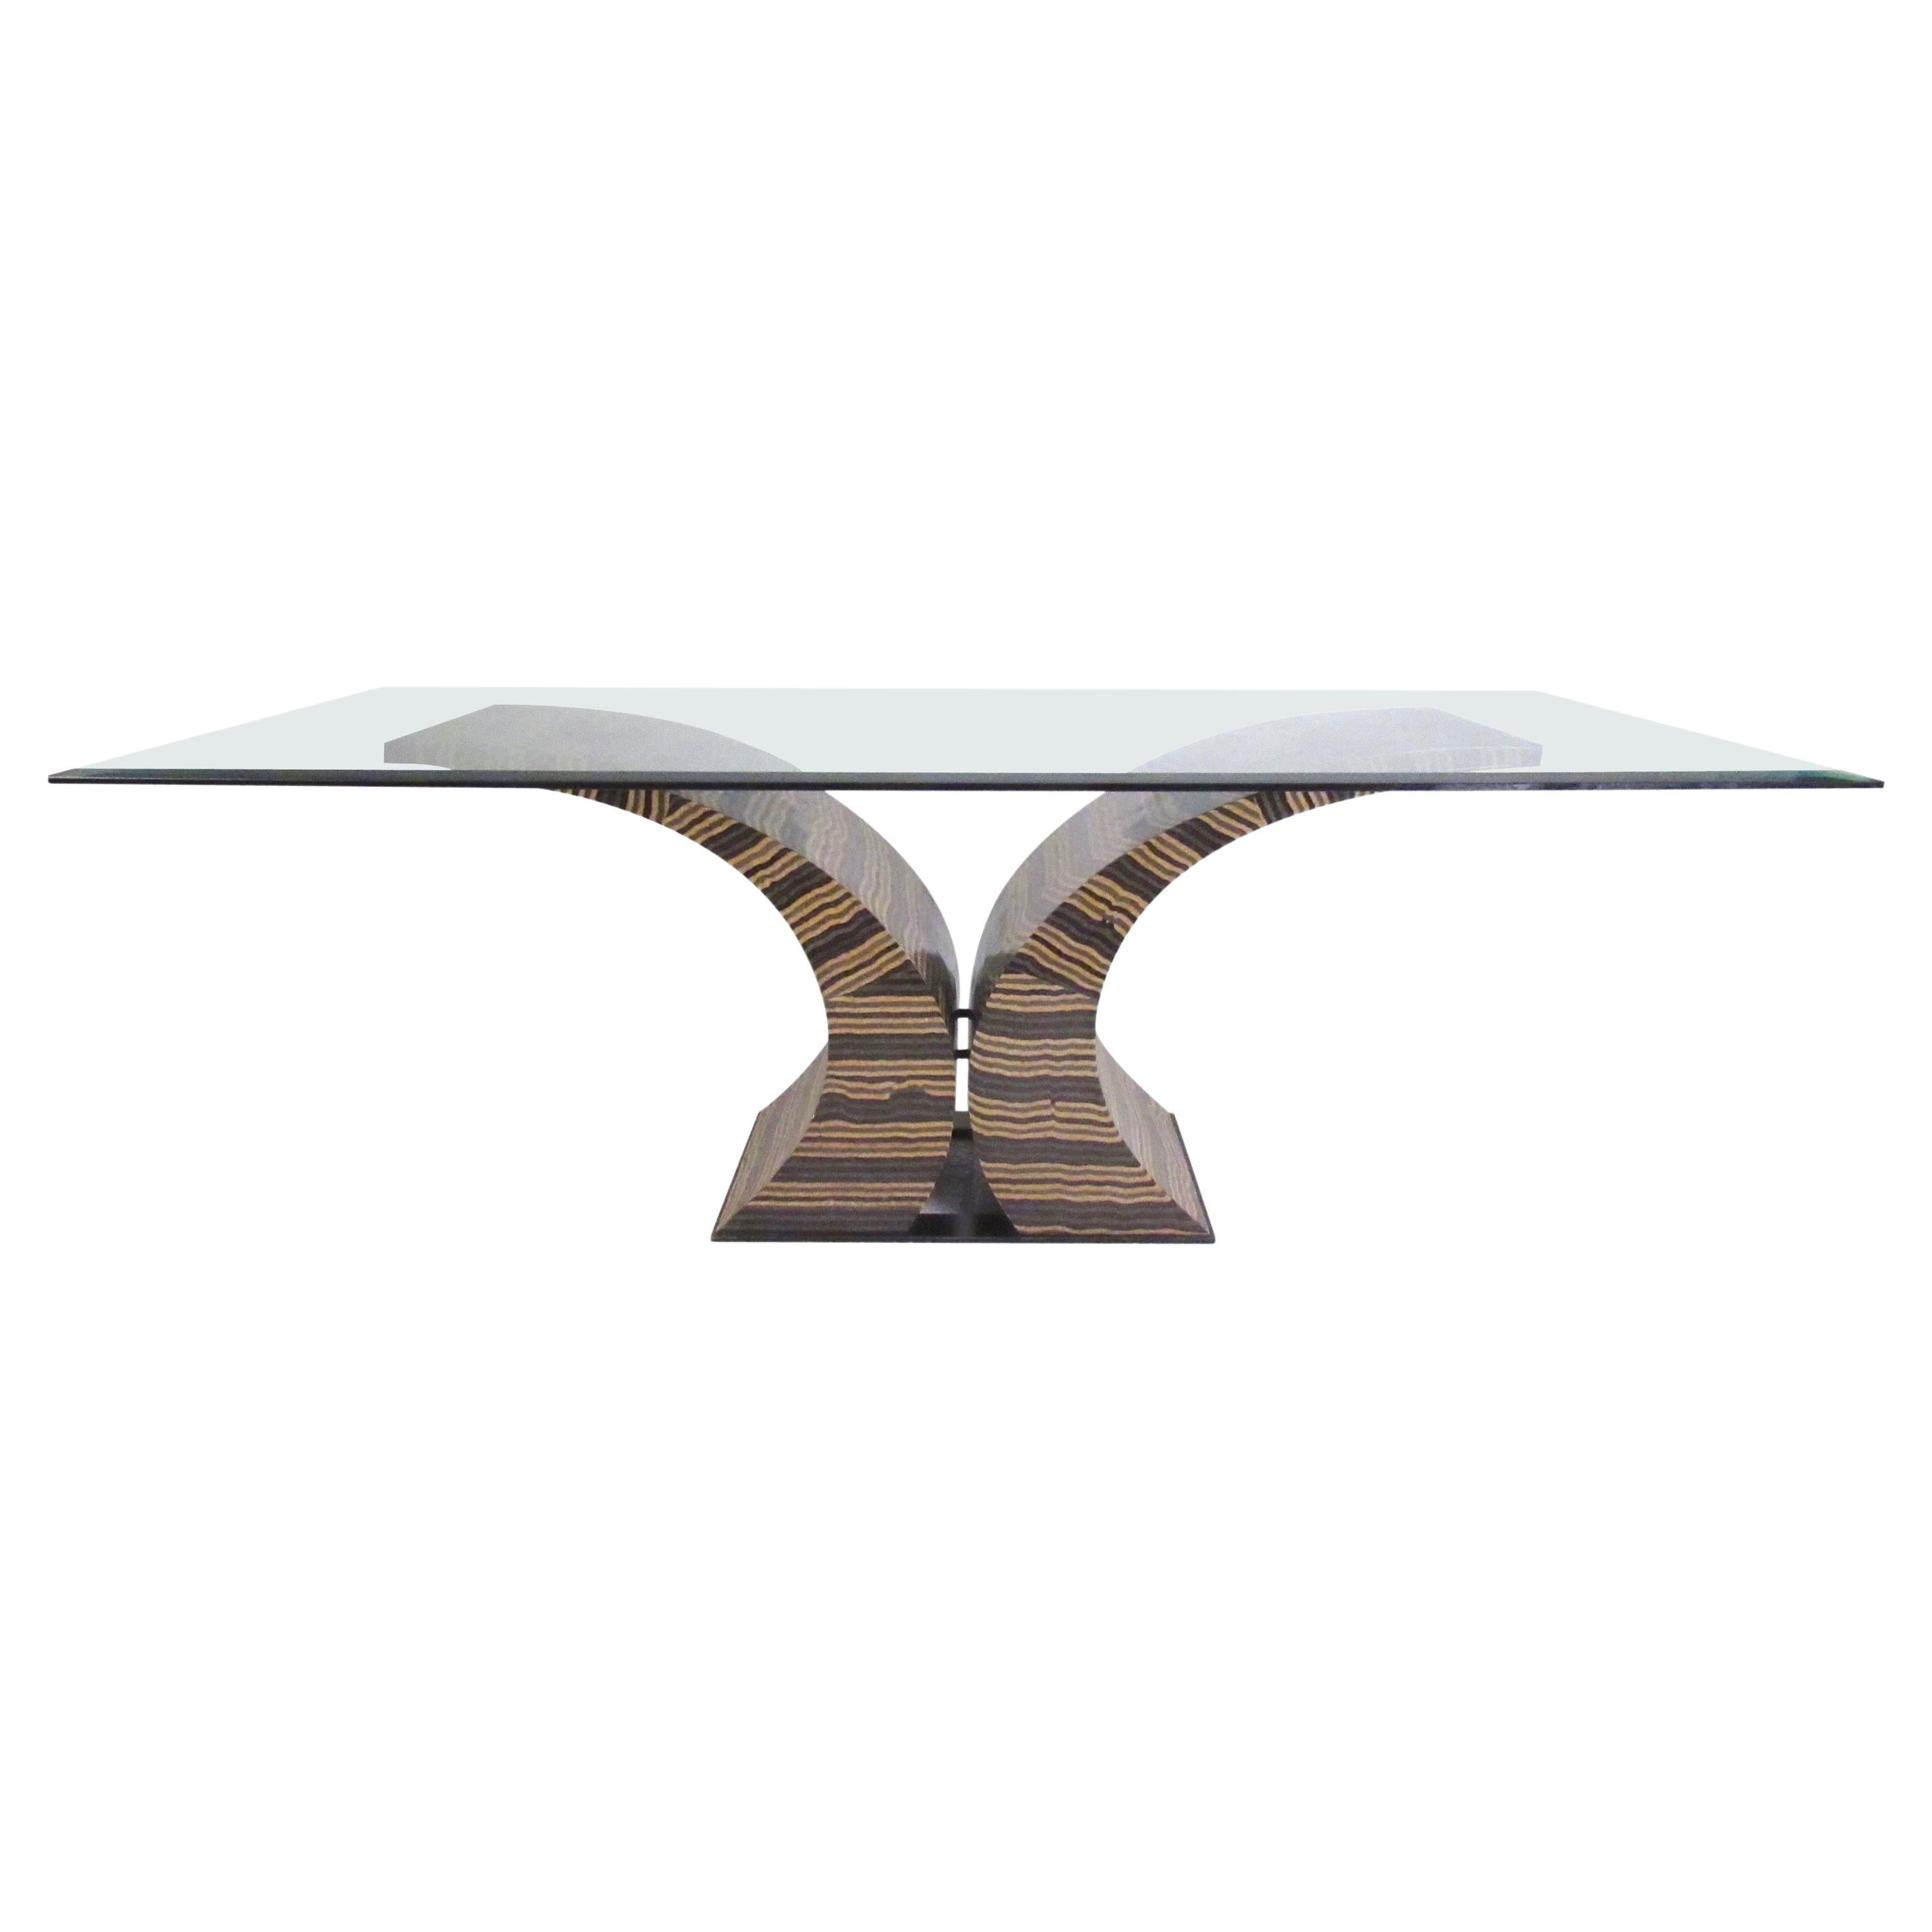 This large-scale dining table features sculptural pedestal style base with thick bevelled glass top. Unique decorators style makes this impressive table a memorable addition to home or business setting. Please confirm item location (NY or NJ).

Base